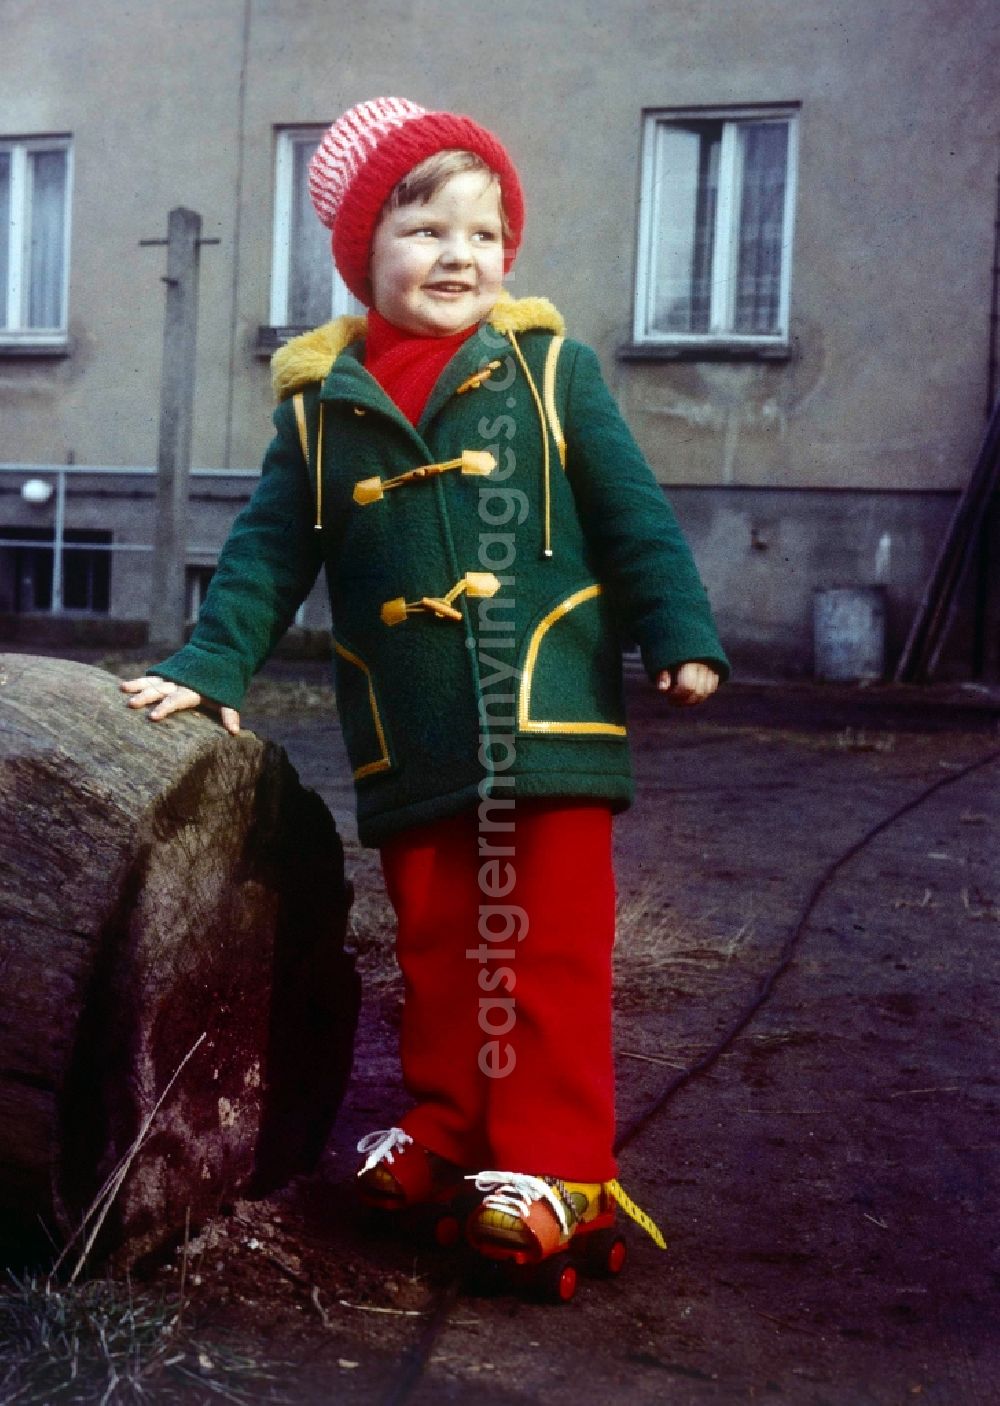 GDR photo archive: Neustrelitz - A girl on roller skates in Neustrelitz in the federal state Mecklenburg-West Pomerania in the area of the former GDR, German democratic republic